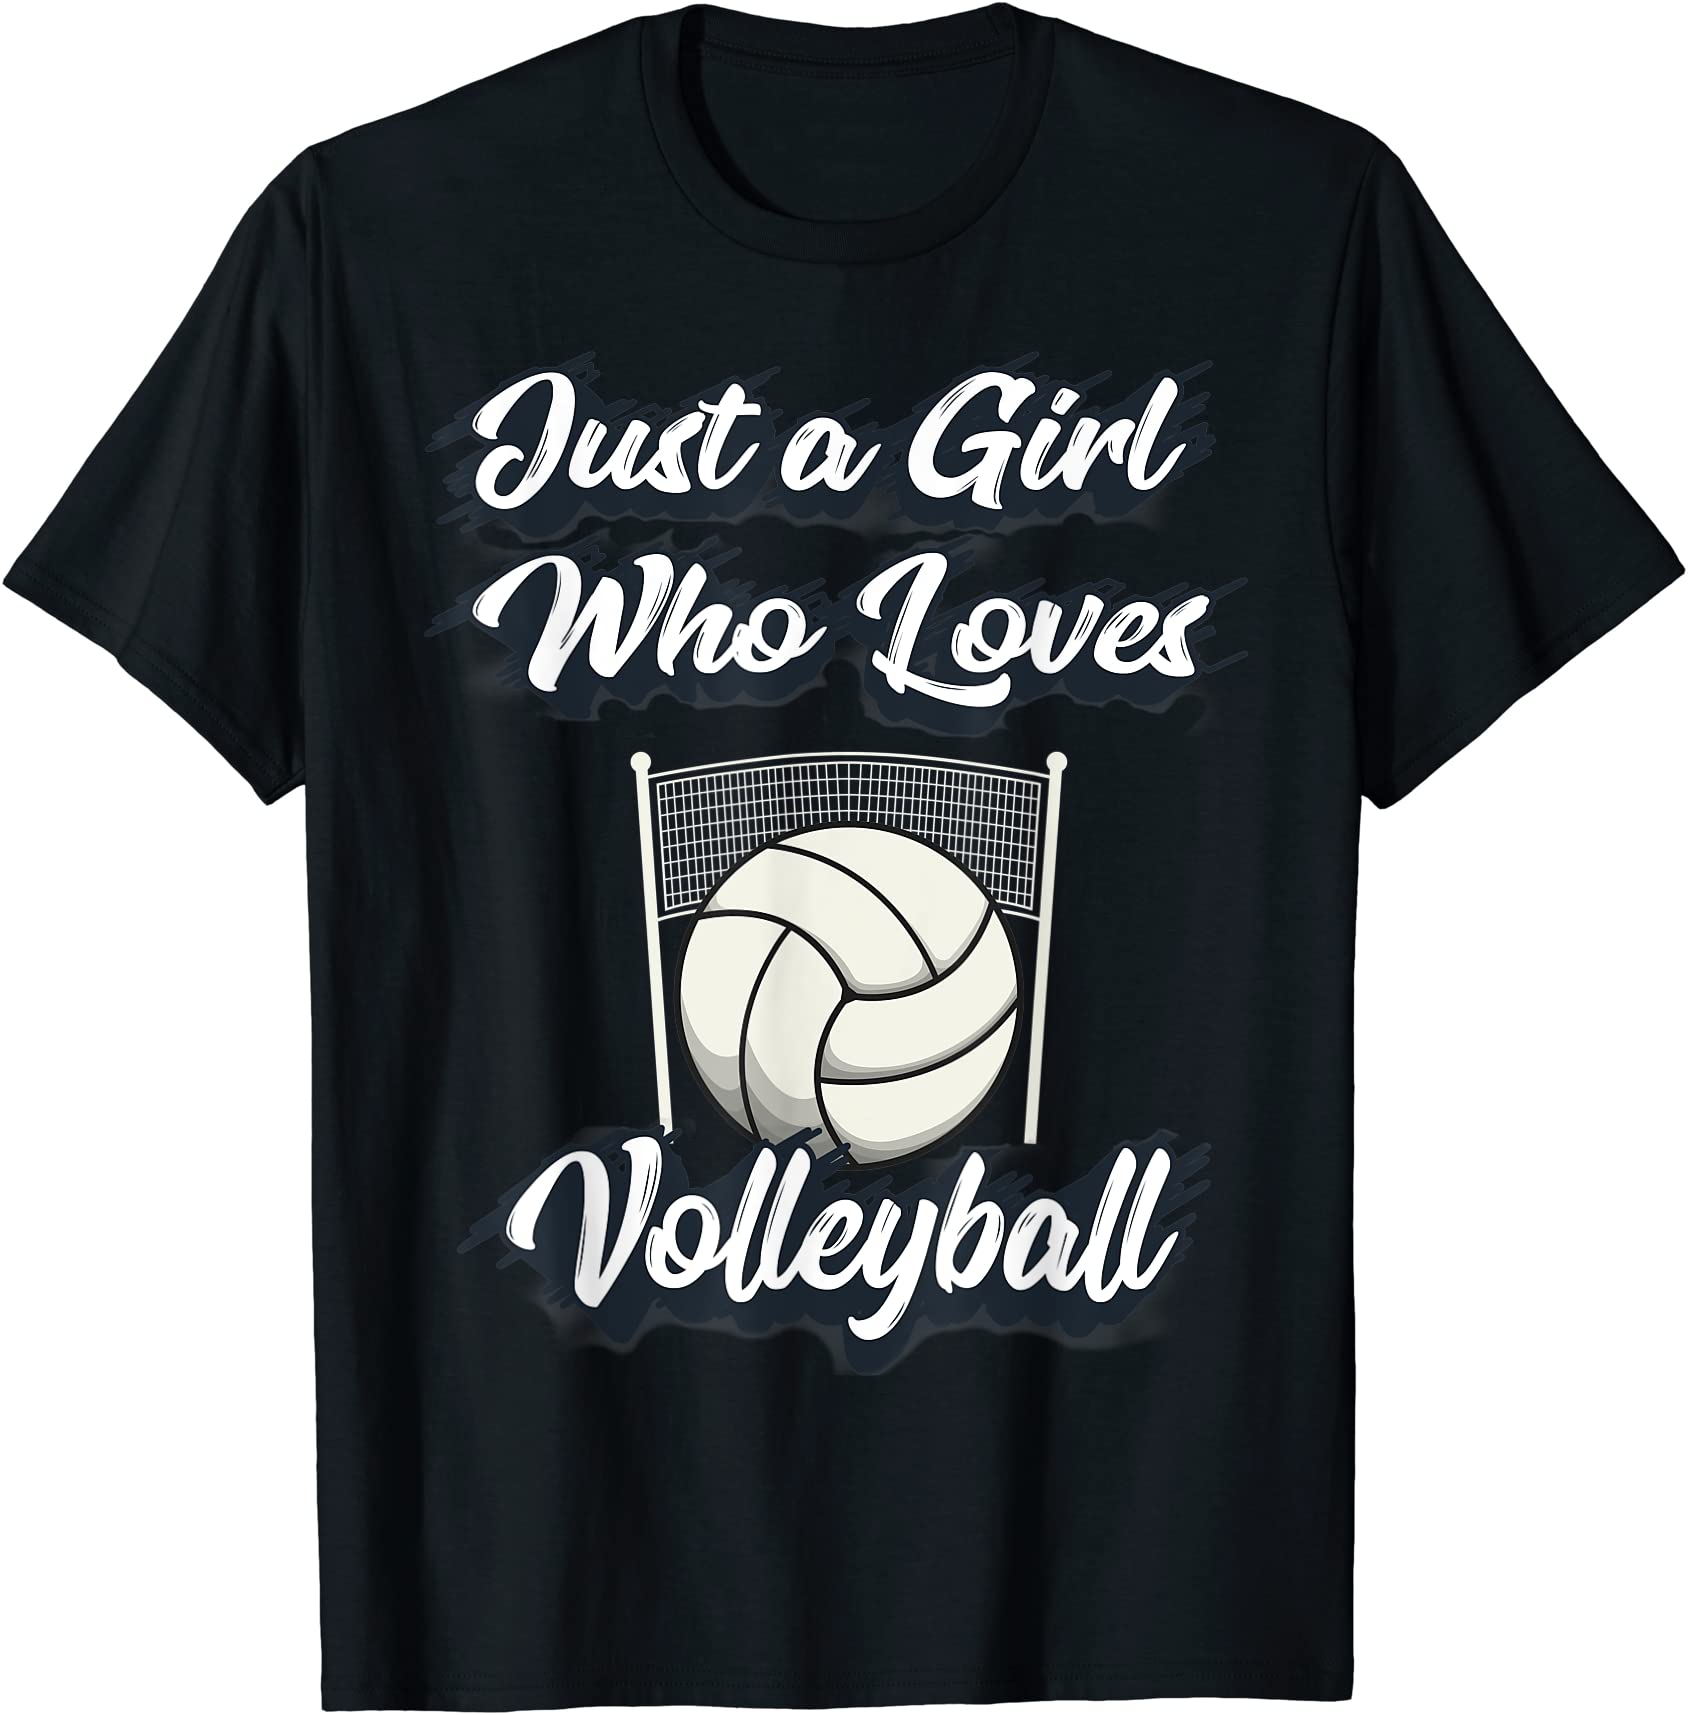 Sport Volleyball Player Design Funny Sayings' Women's T-Shirt